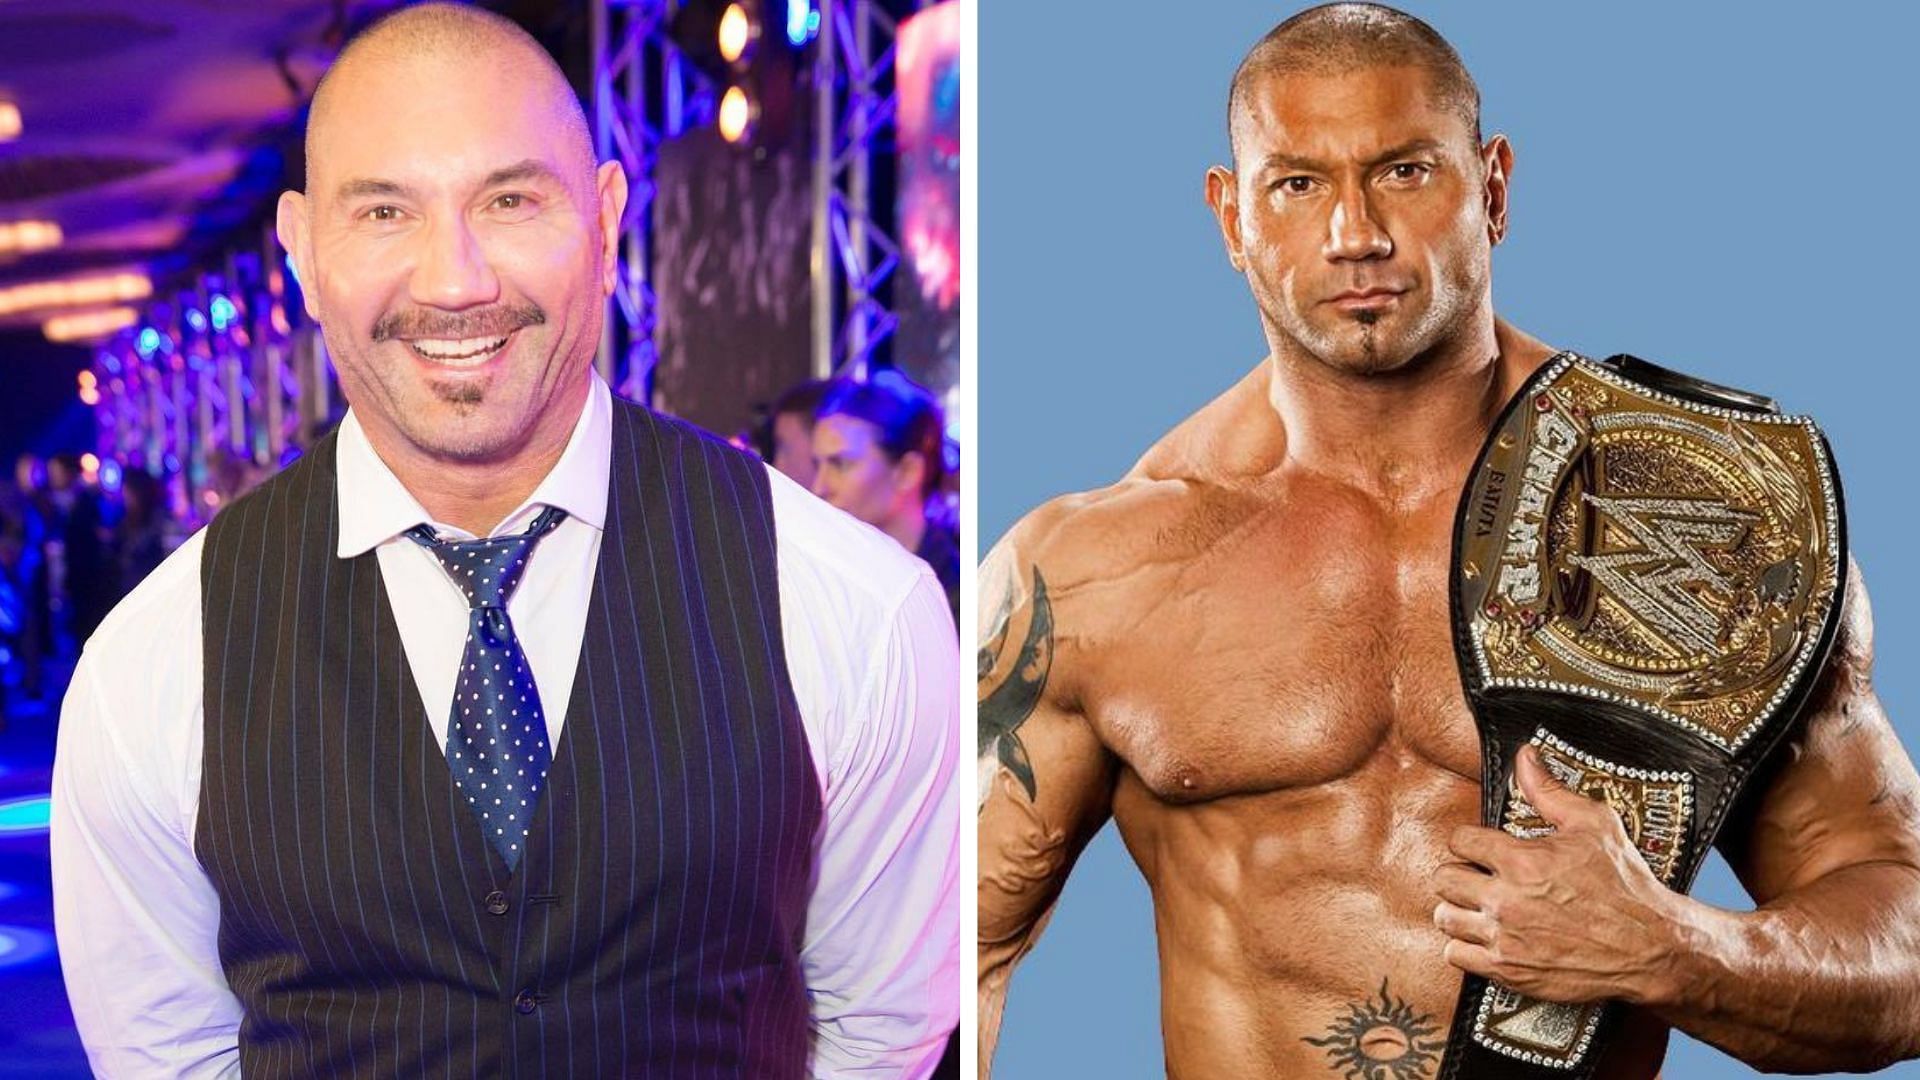 Batista celebrated his 54th birthday today.